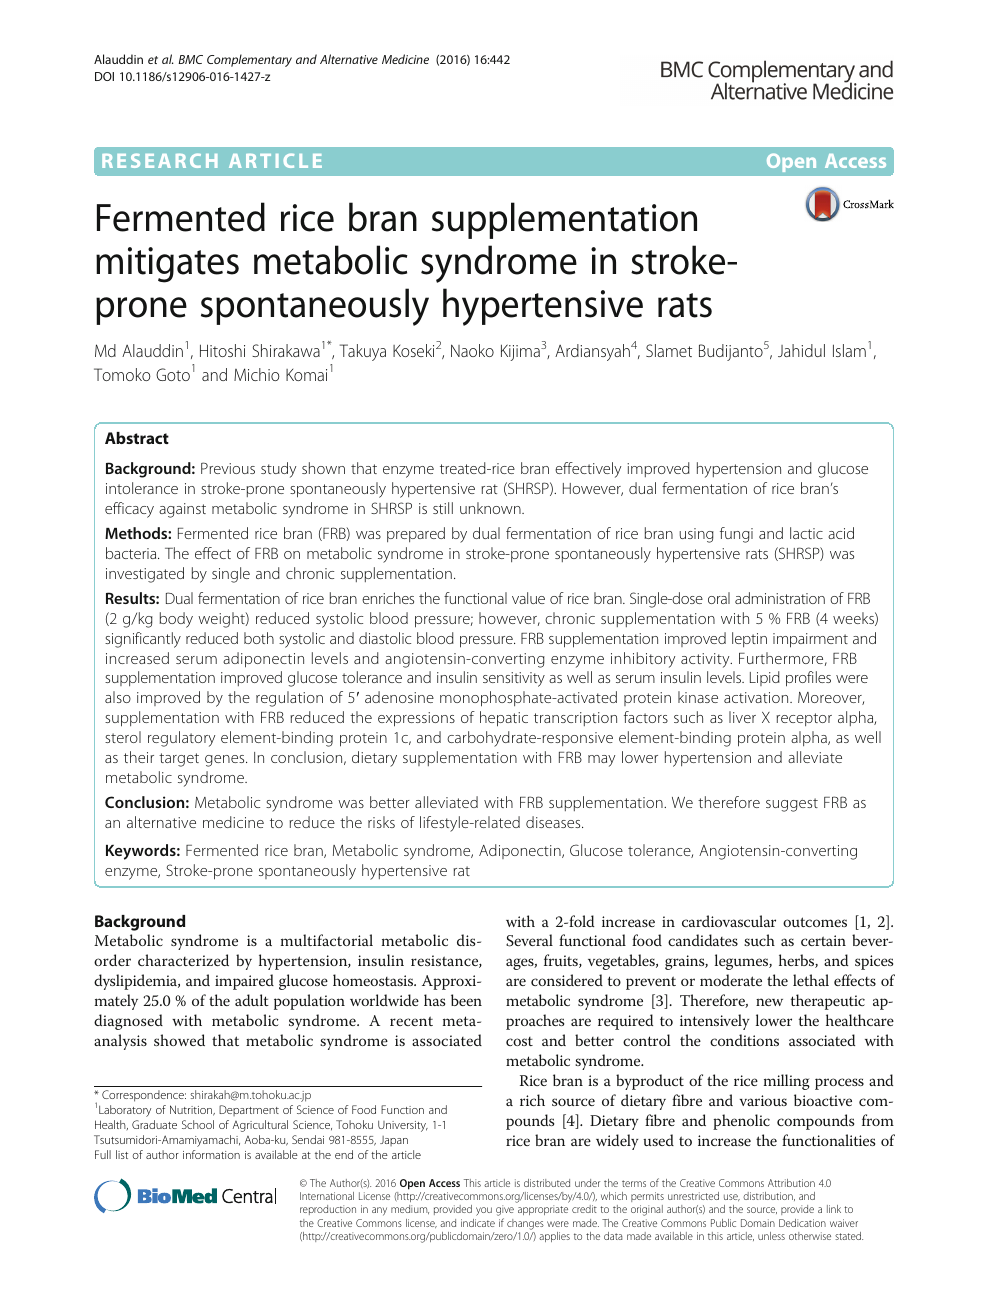 Fermented Rice Bran Supplementation Mitigates Metabolic Syndrome In Stroke Prone Spontaneously Hypertensive Rats Topic Of Research Paper In Health Sciences Download Scholarly Article Pdf And Read For Free On Cyberleninka Open Science